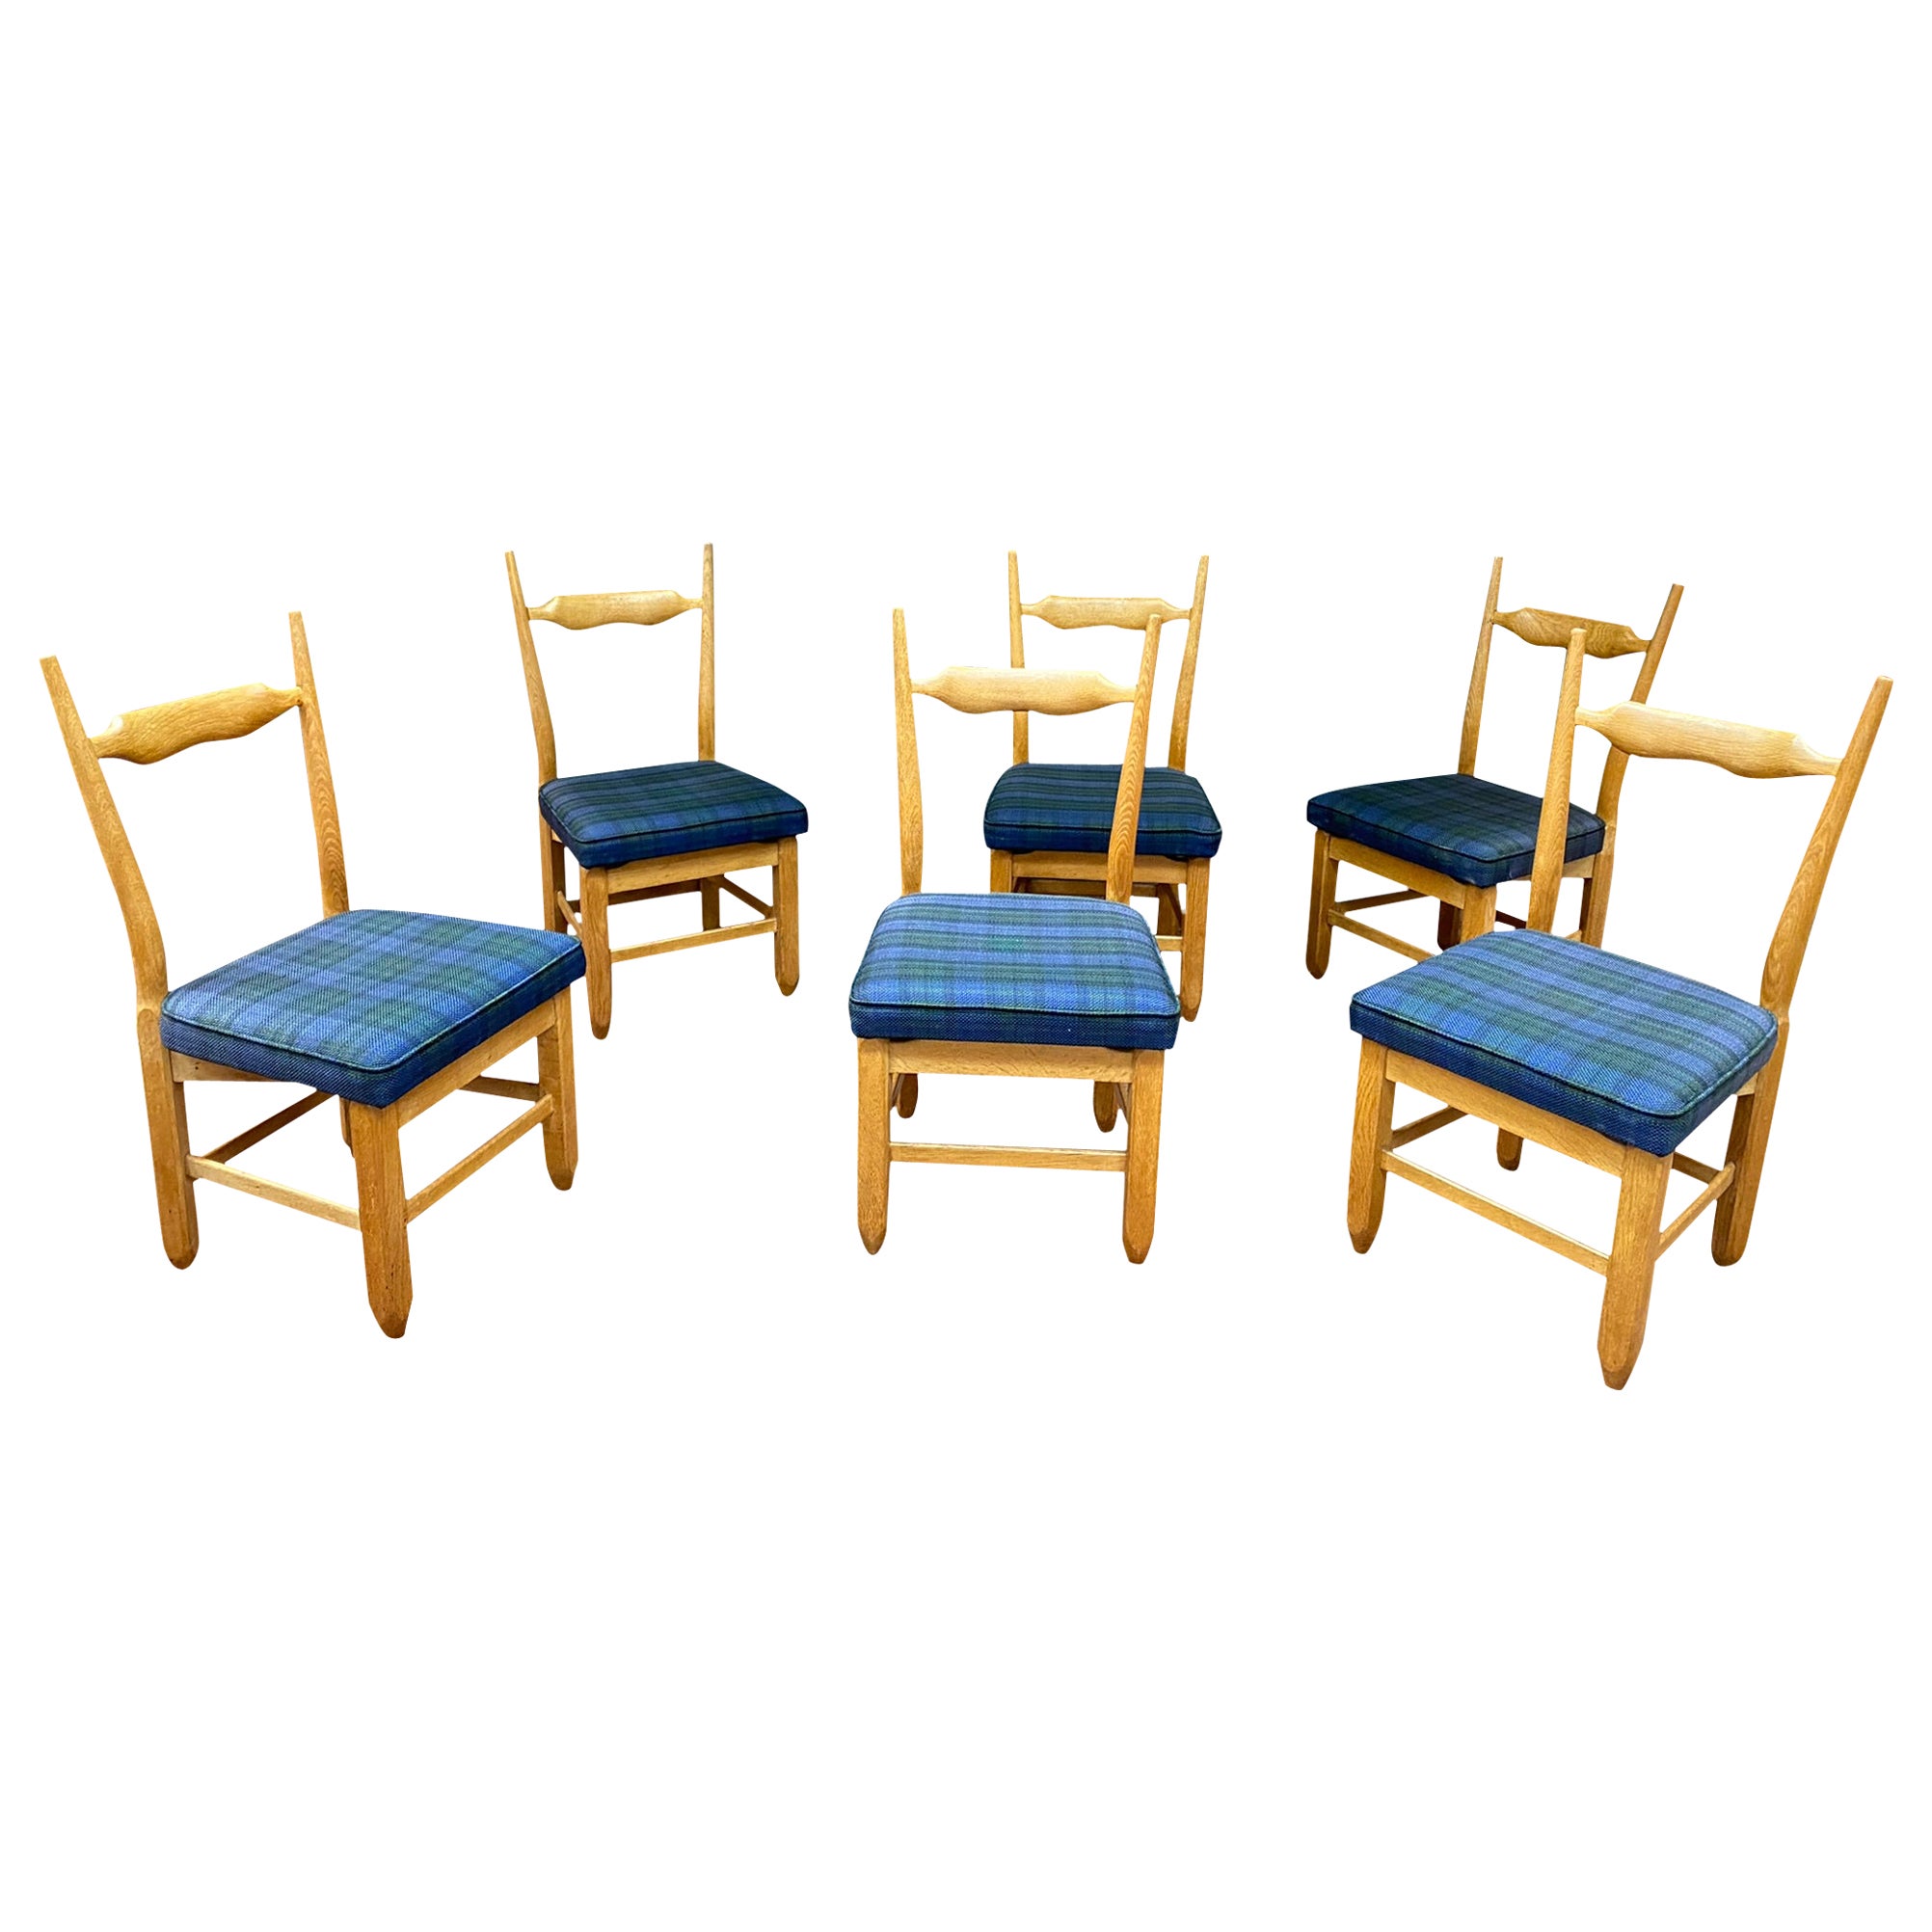 Guillerme and Chambron, Suite of 6 Chairs Model "Marie-Claire", circa 1970 For Sale